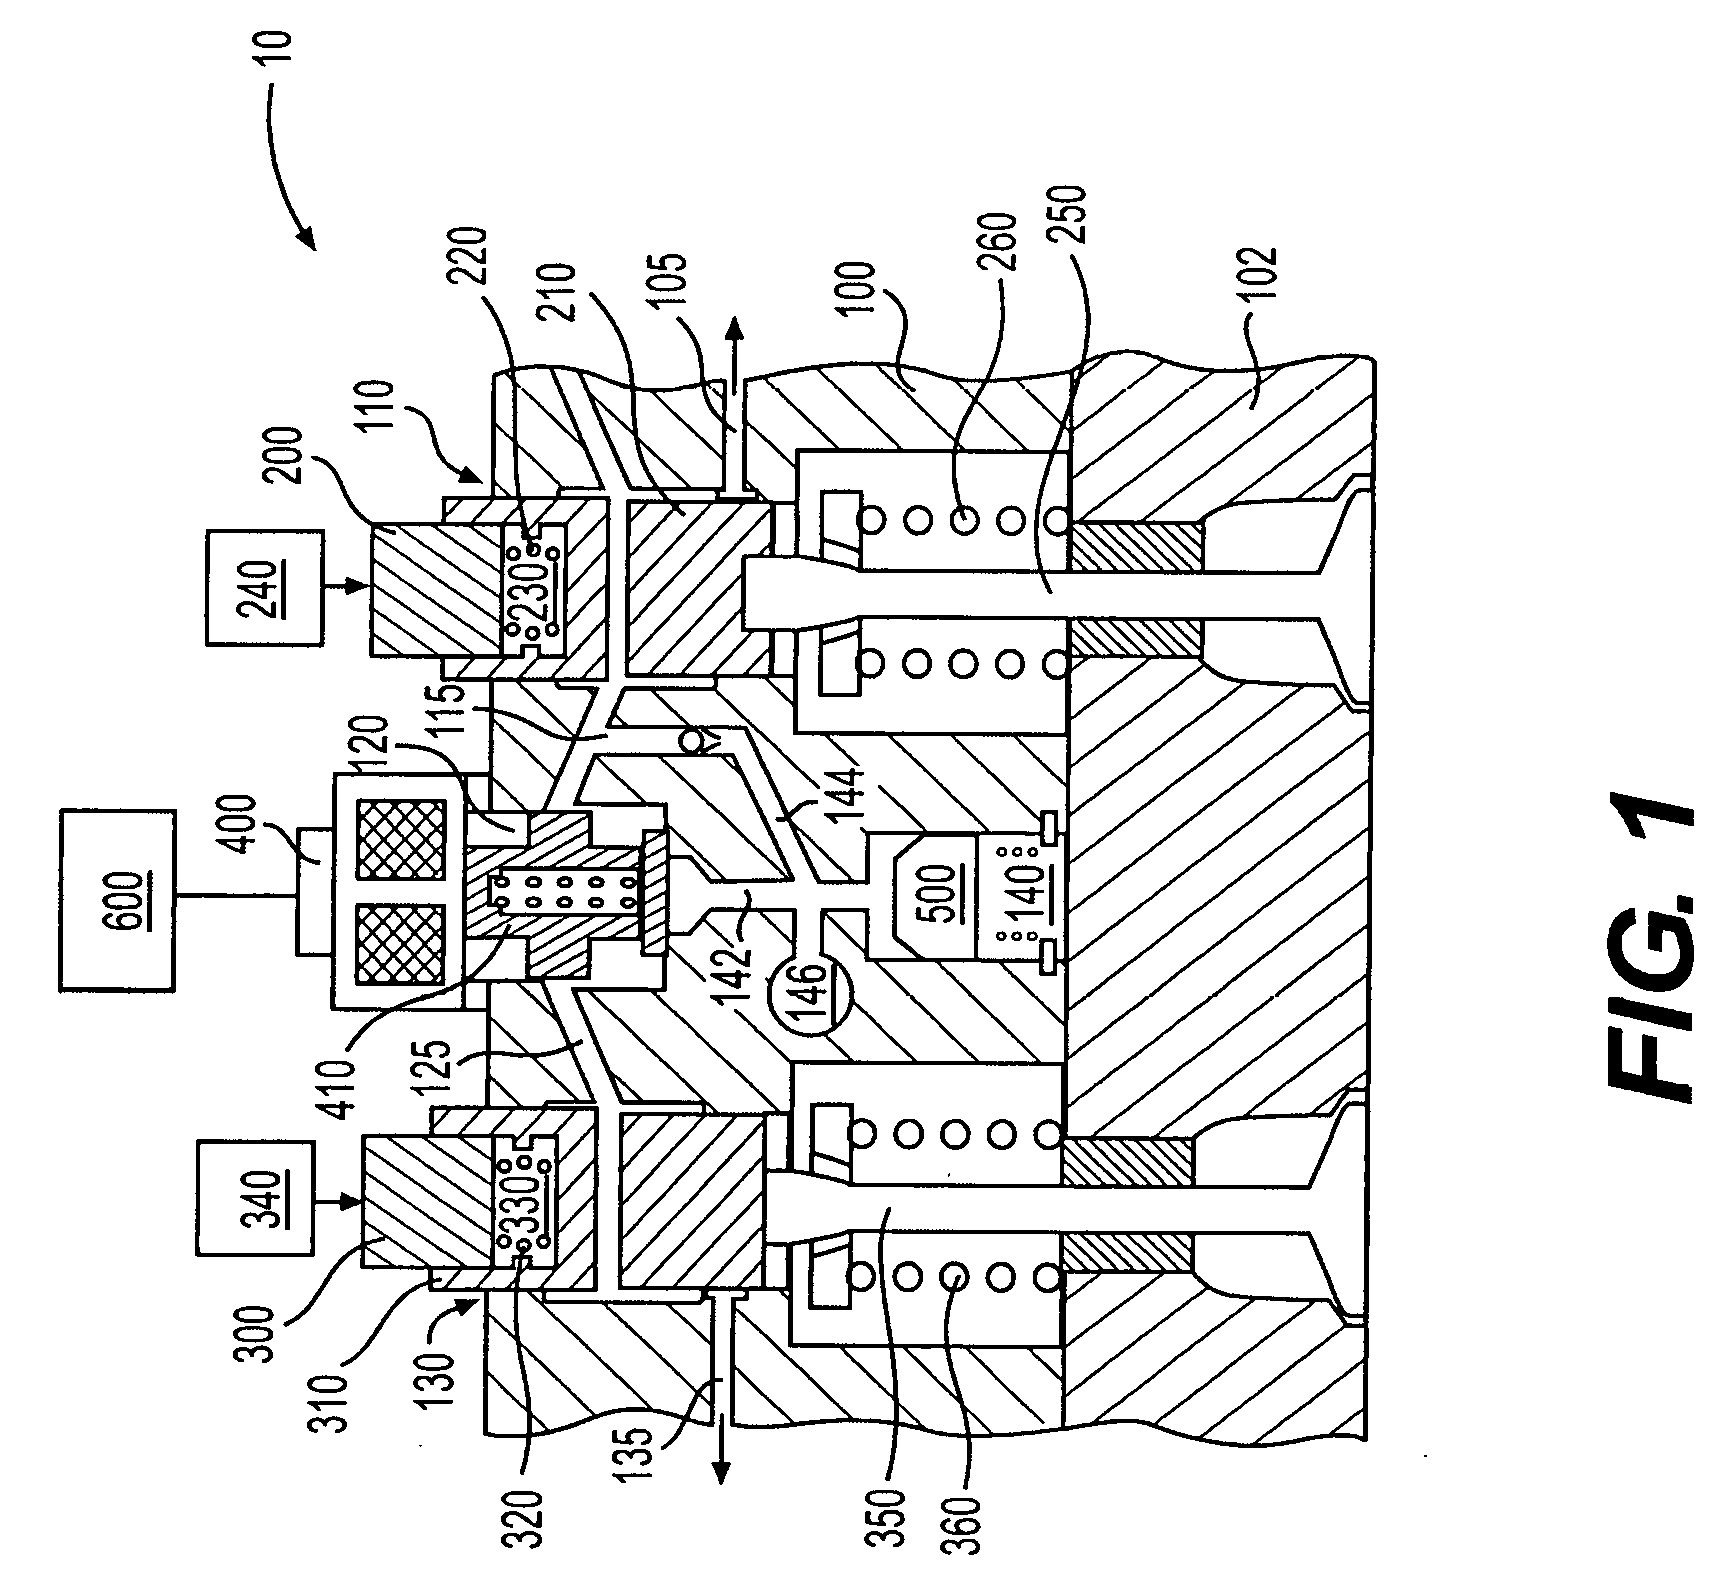 Variable valve actuation and engine braking